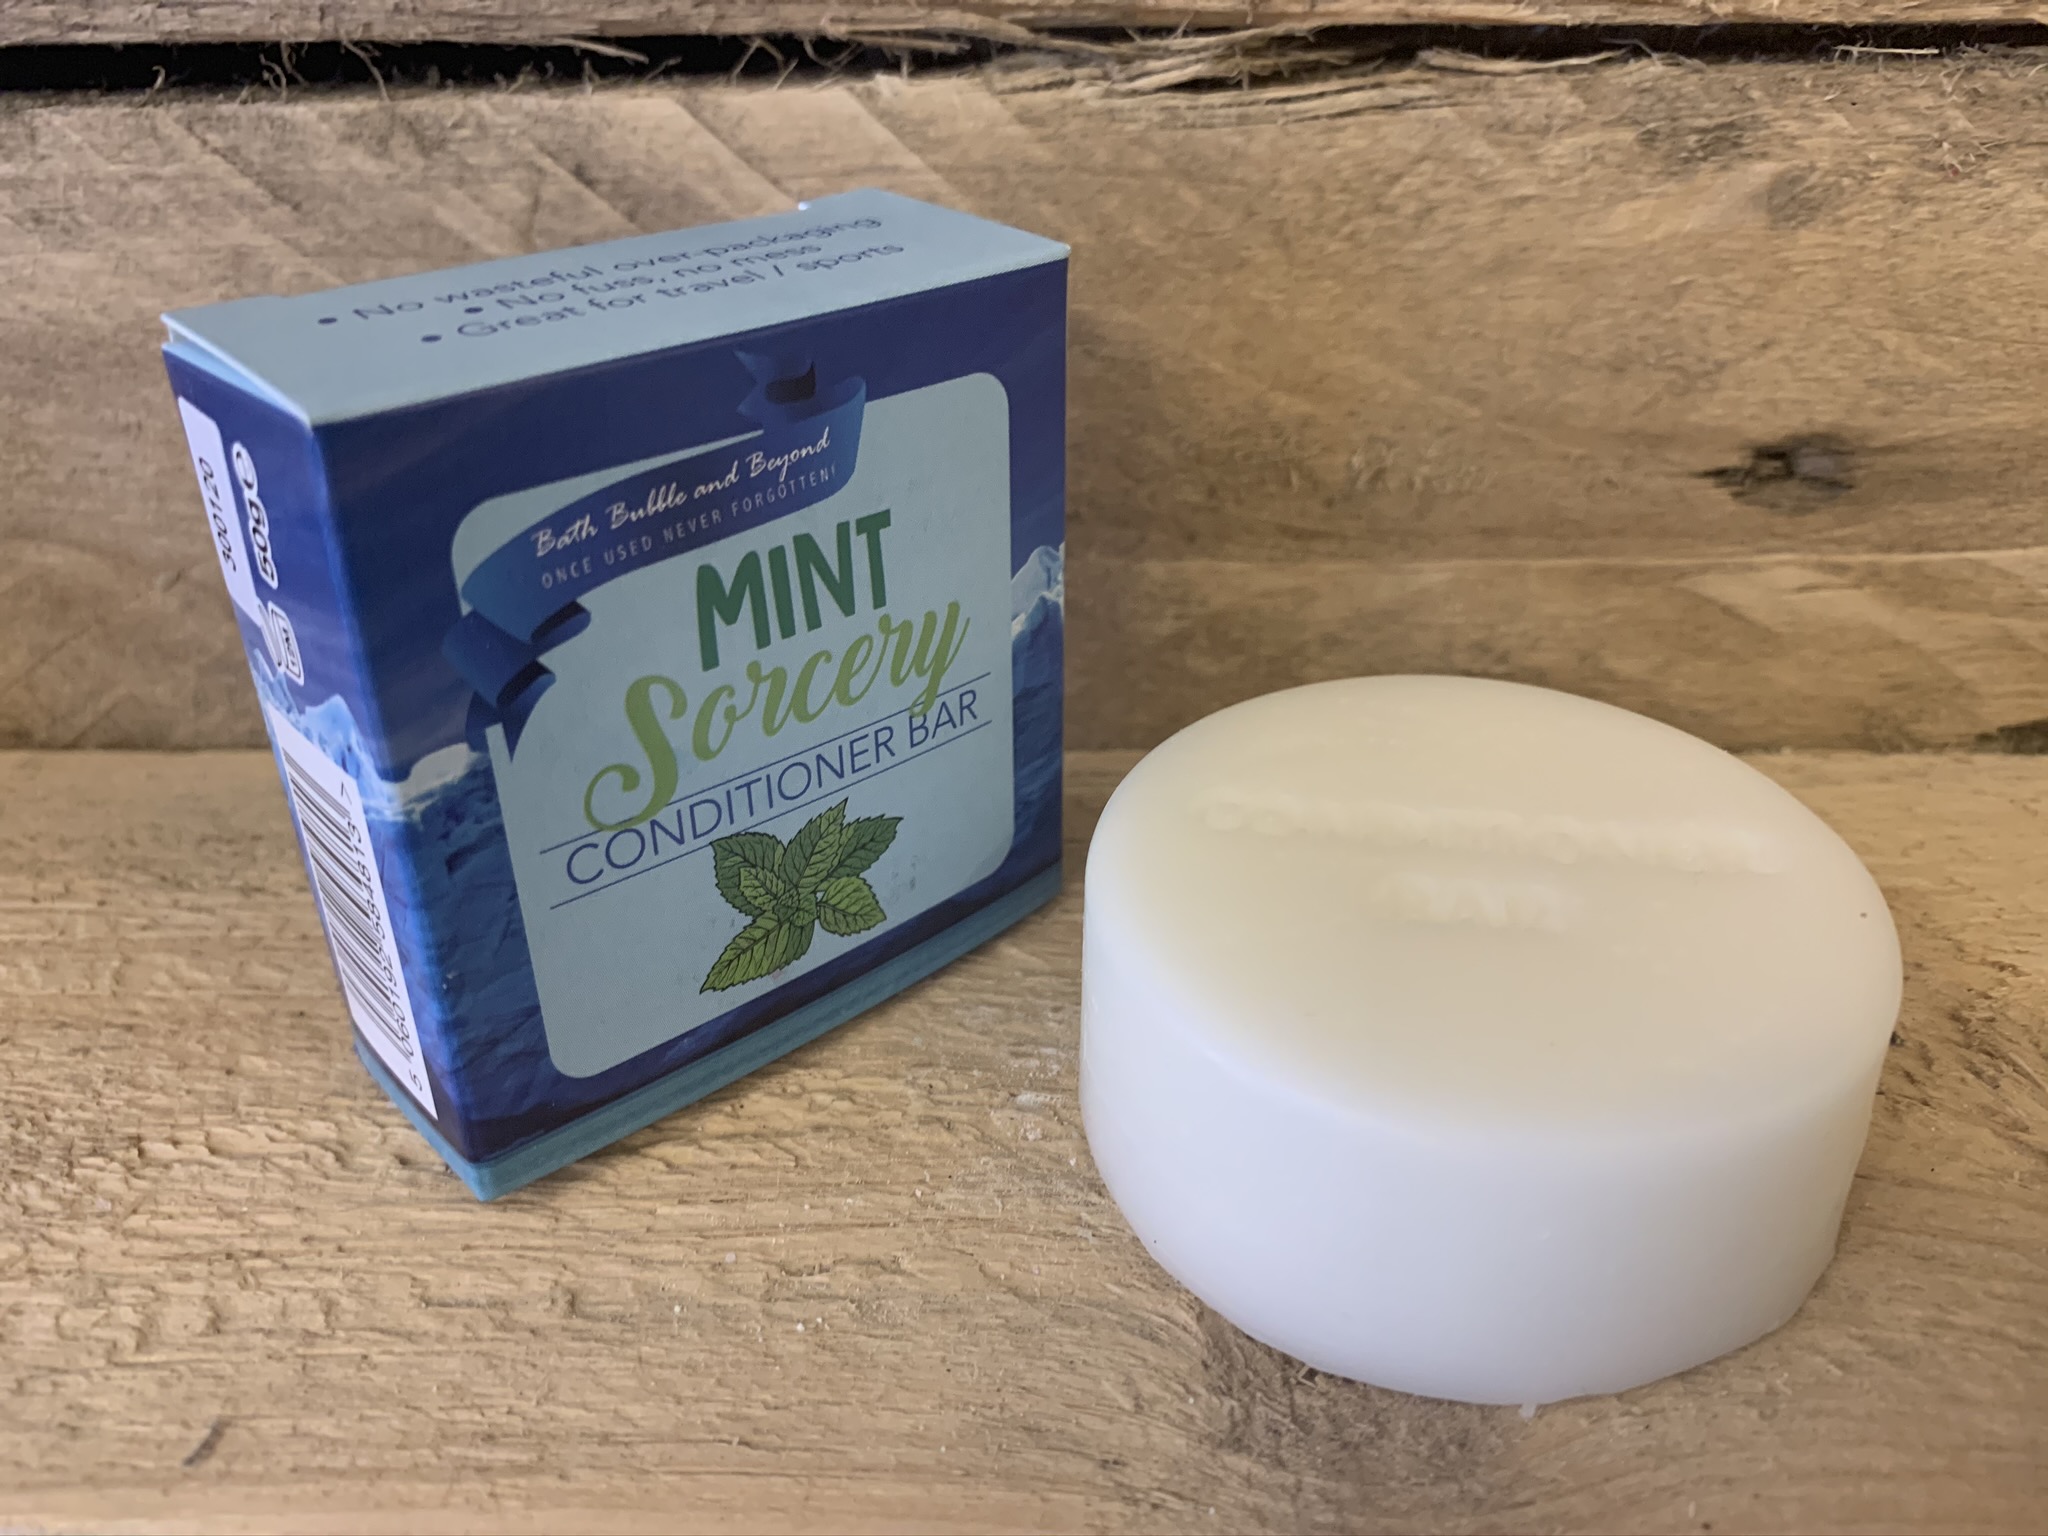 Mint Sorcery Boxed Solid Hair Conditioner Bar